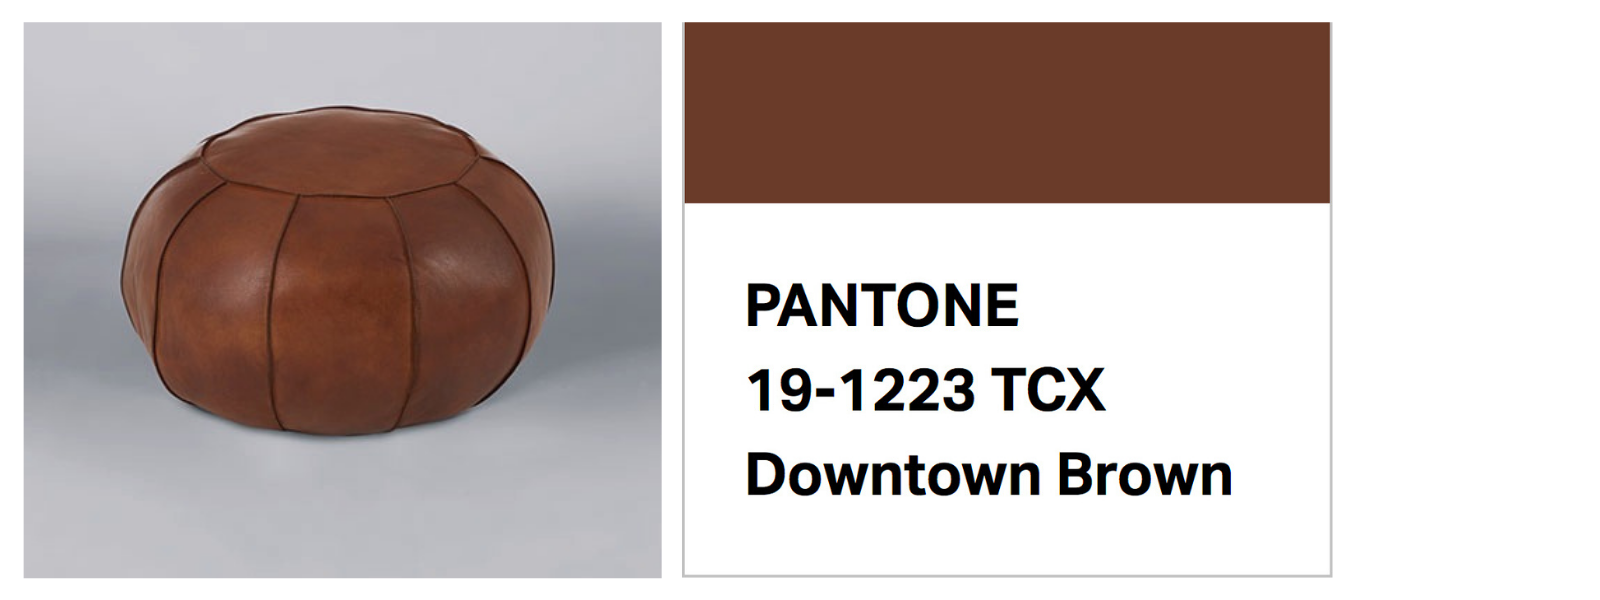 brown leather pouffe